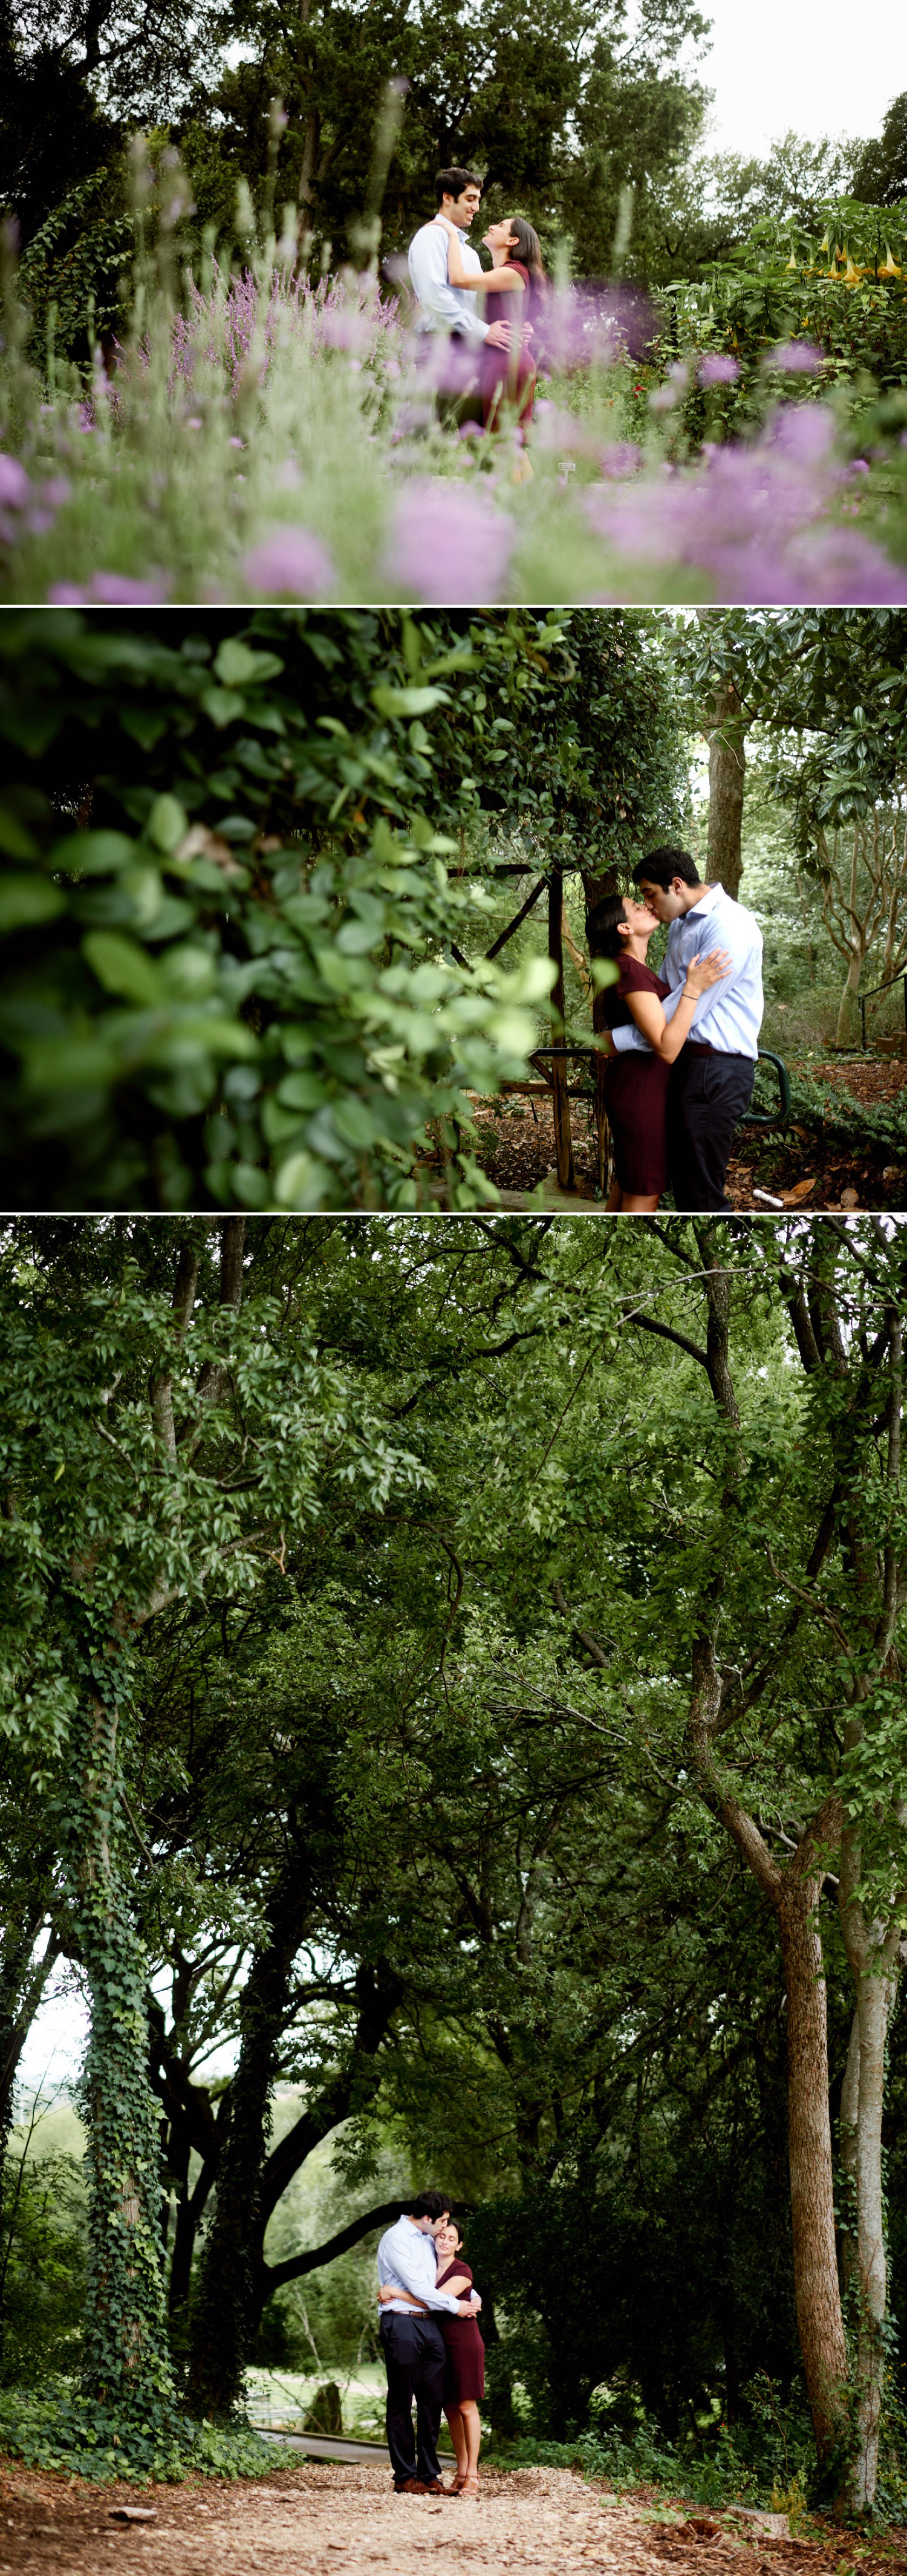 A few of our favorite photos from Katyayani and Pratik's engagement session and proposal at Austin Zilker Botanical Garden